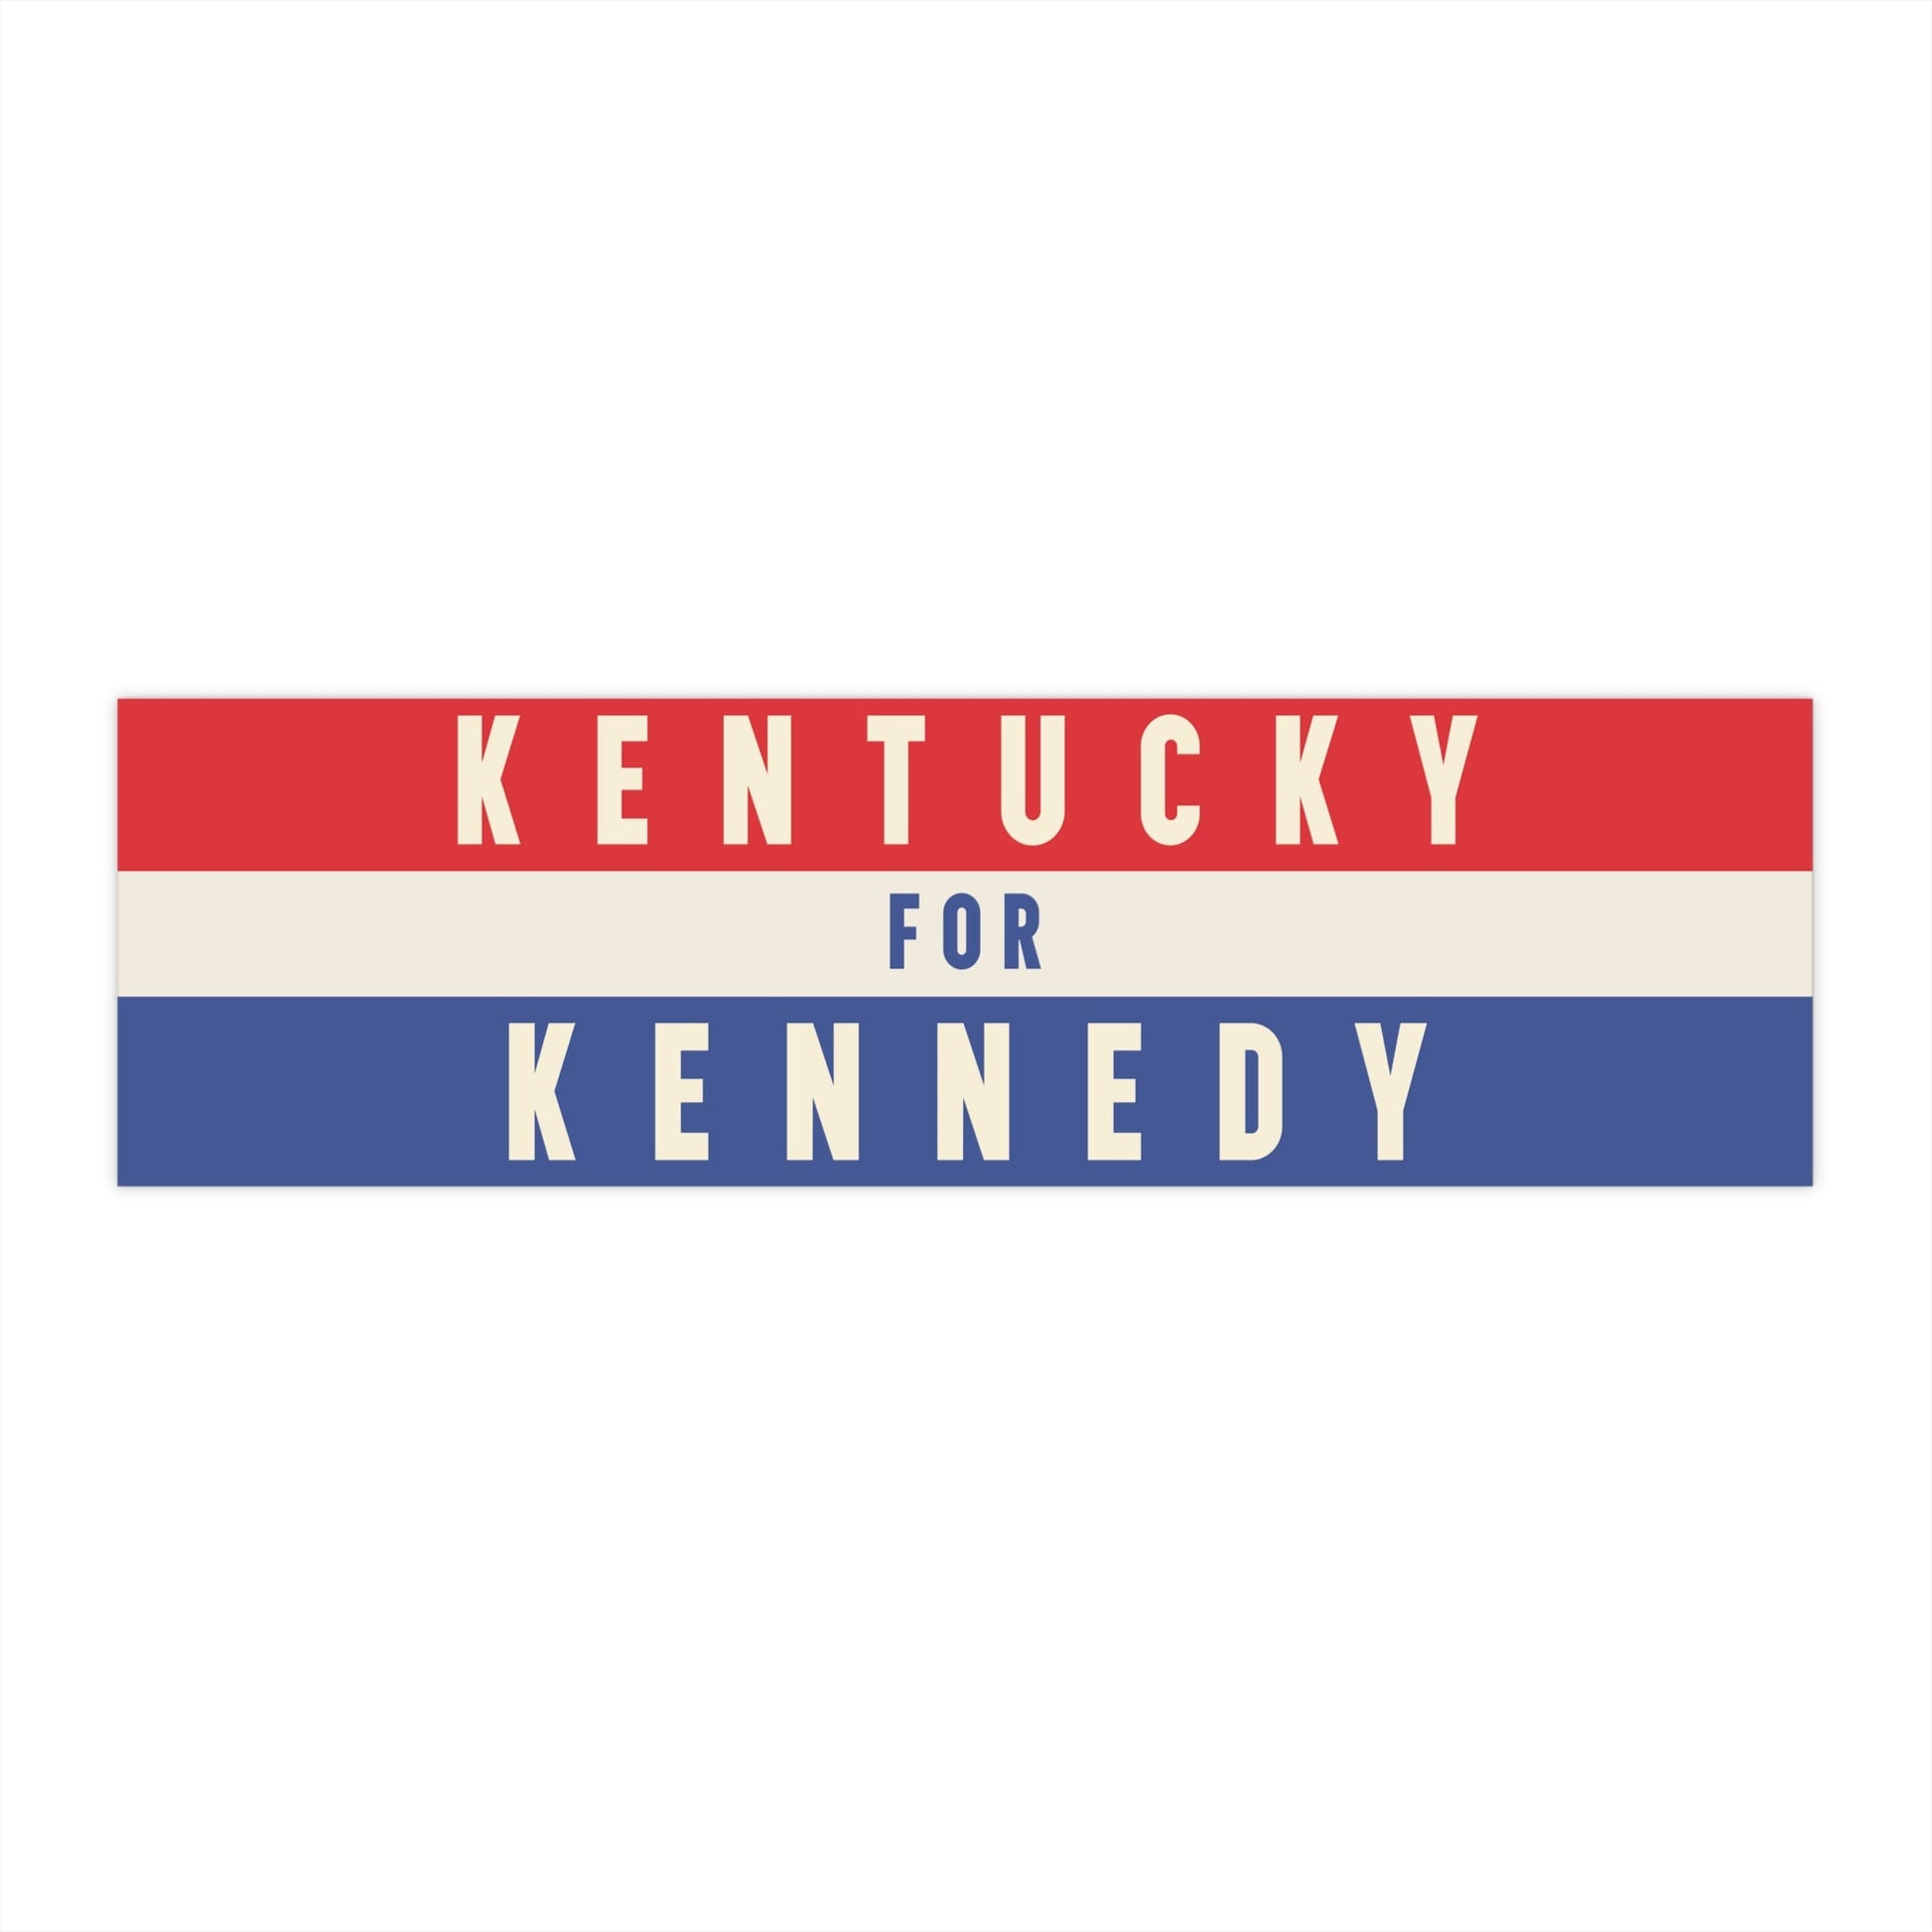 Kentucky for Kennedy Bumper Sticker - TEAM KENNEDY. All rights reserved